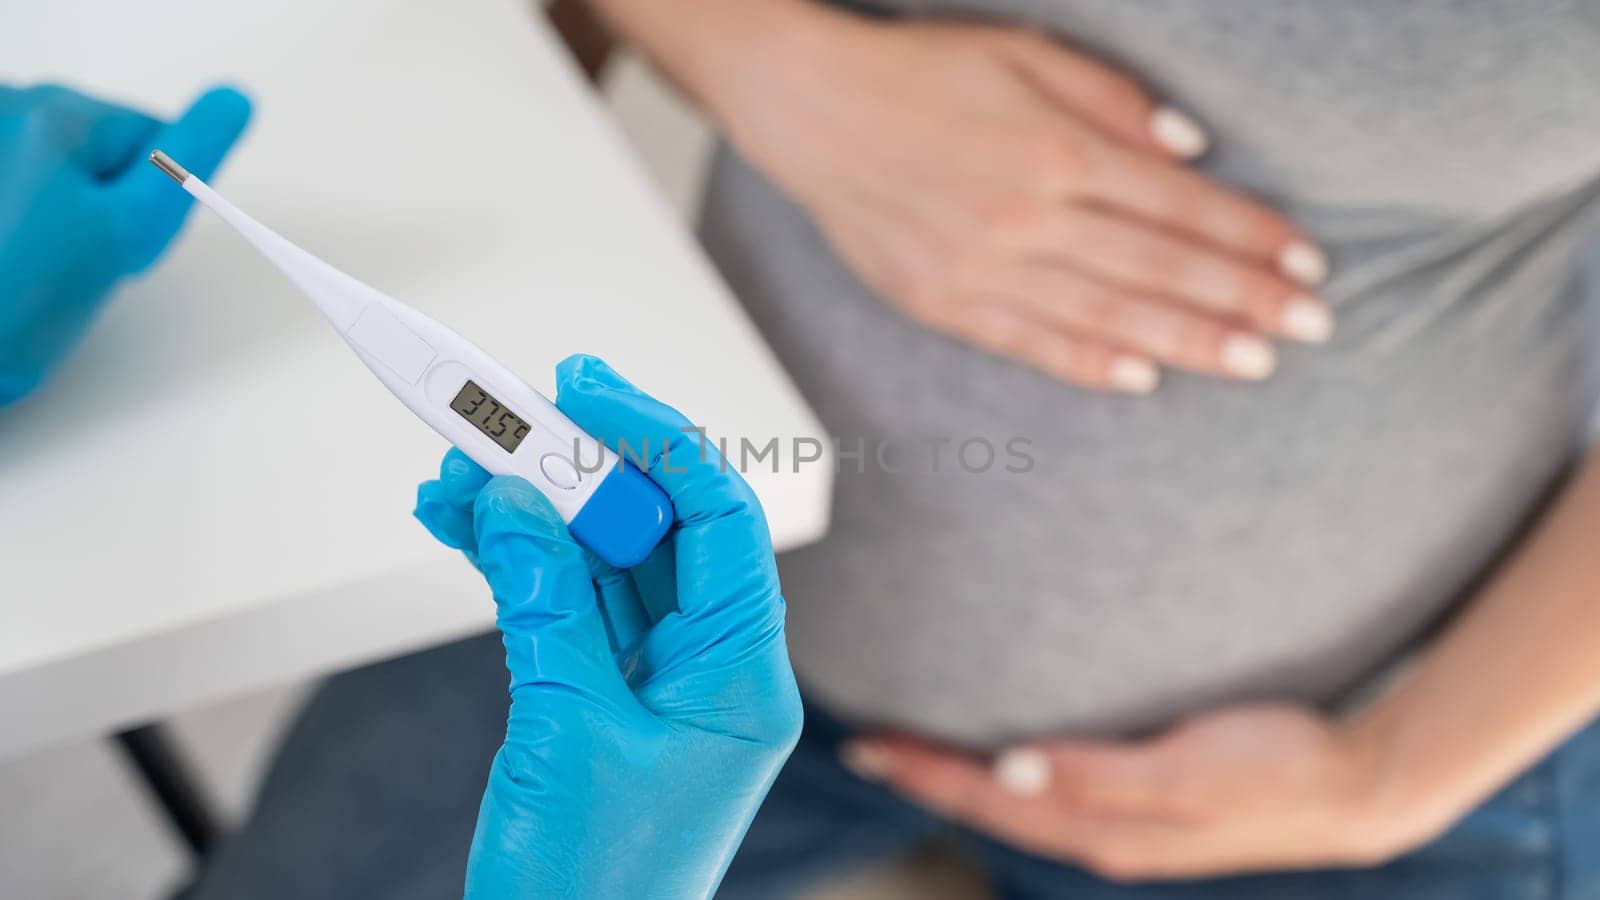 Pregnant woman with fever at doctor's appointment. Therapist holds an electronic thermometer with a temperature of 37.5